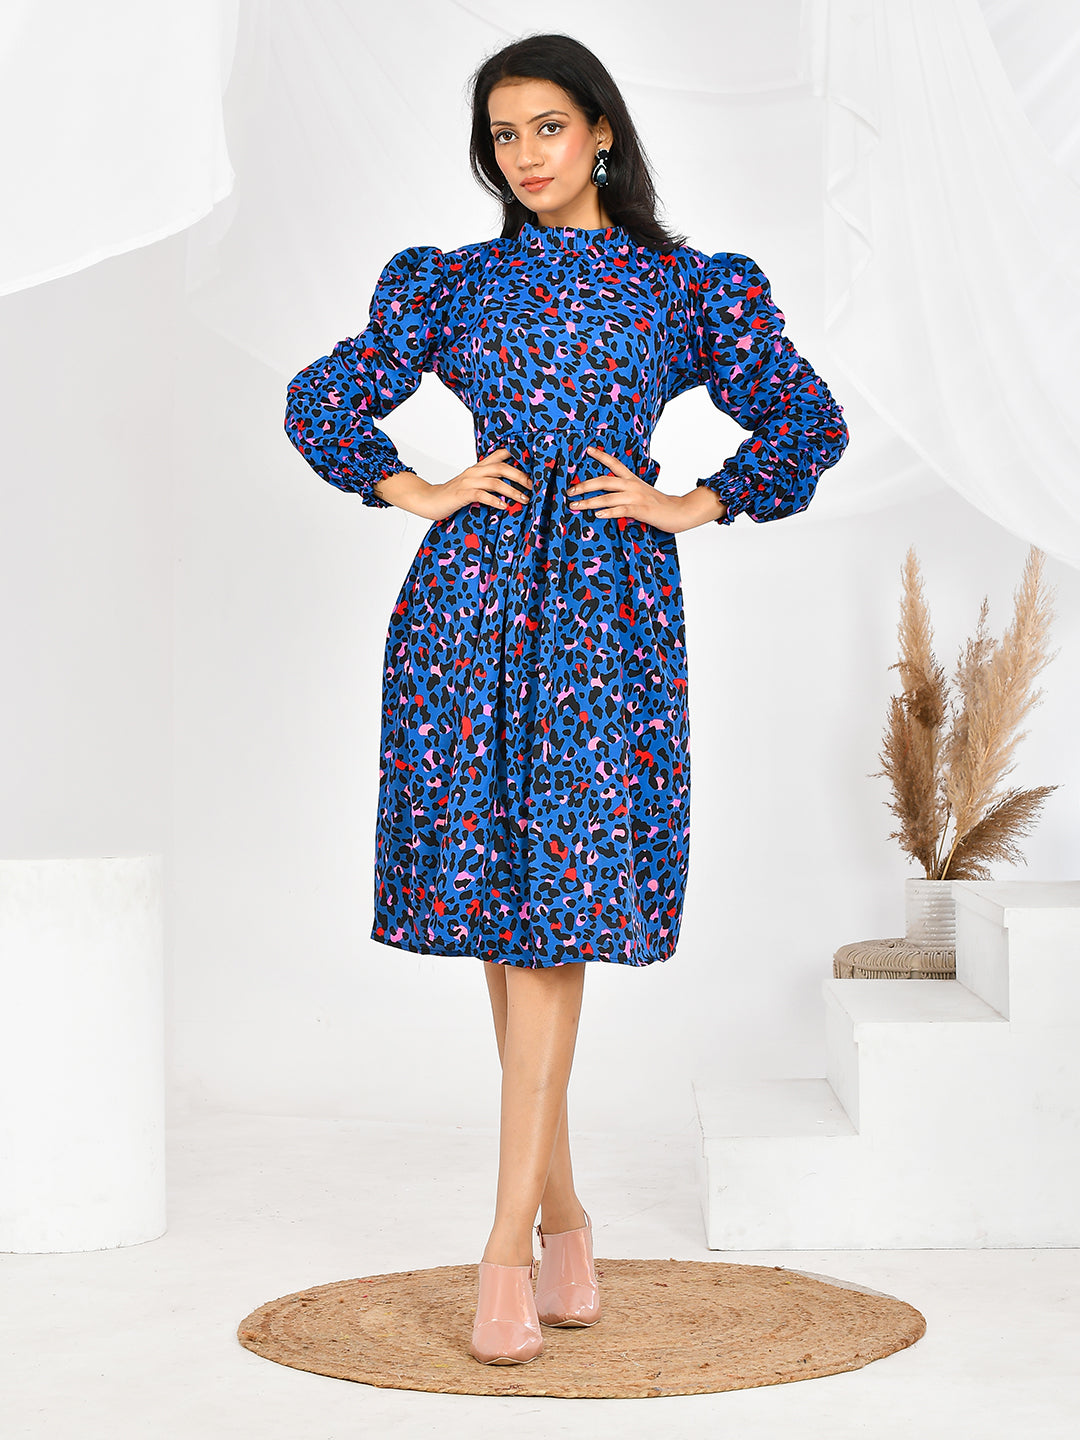 The beautiful blue print adds a touch of elegance and sophistication, while the comfortable fit ensures you'll look and feel your best. Upgrade your wardrobe with our must-have dresses today.